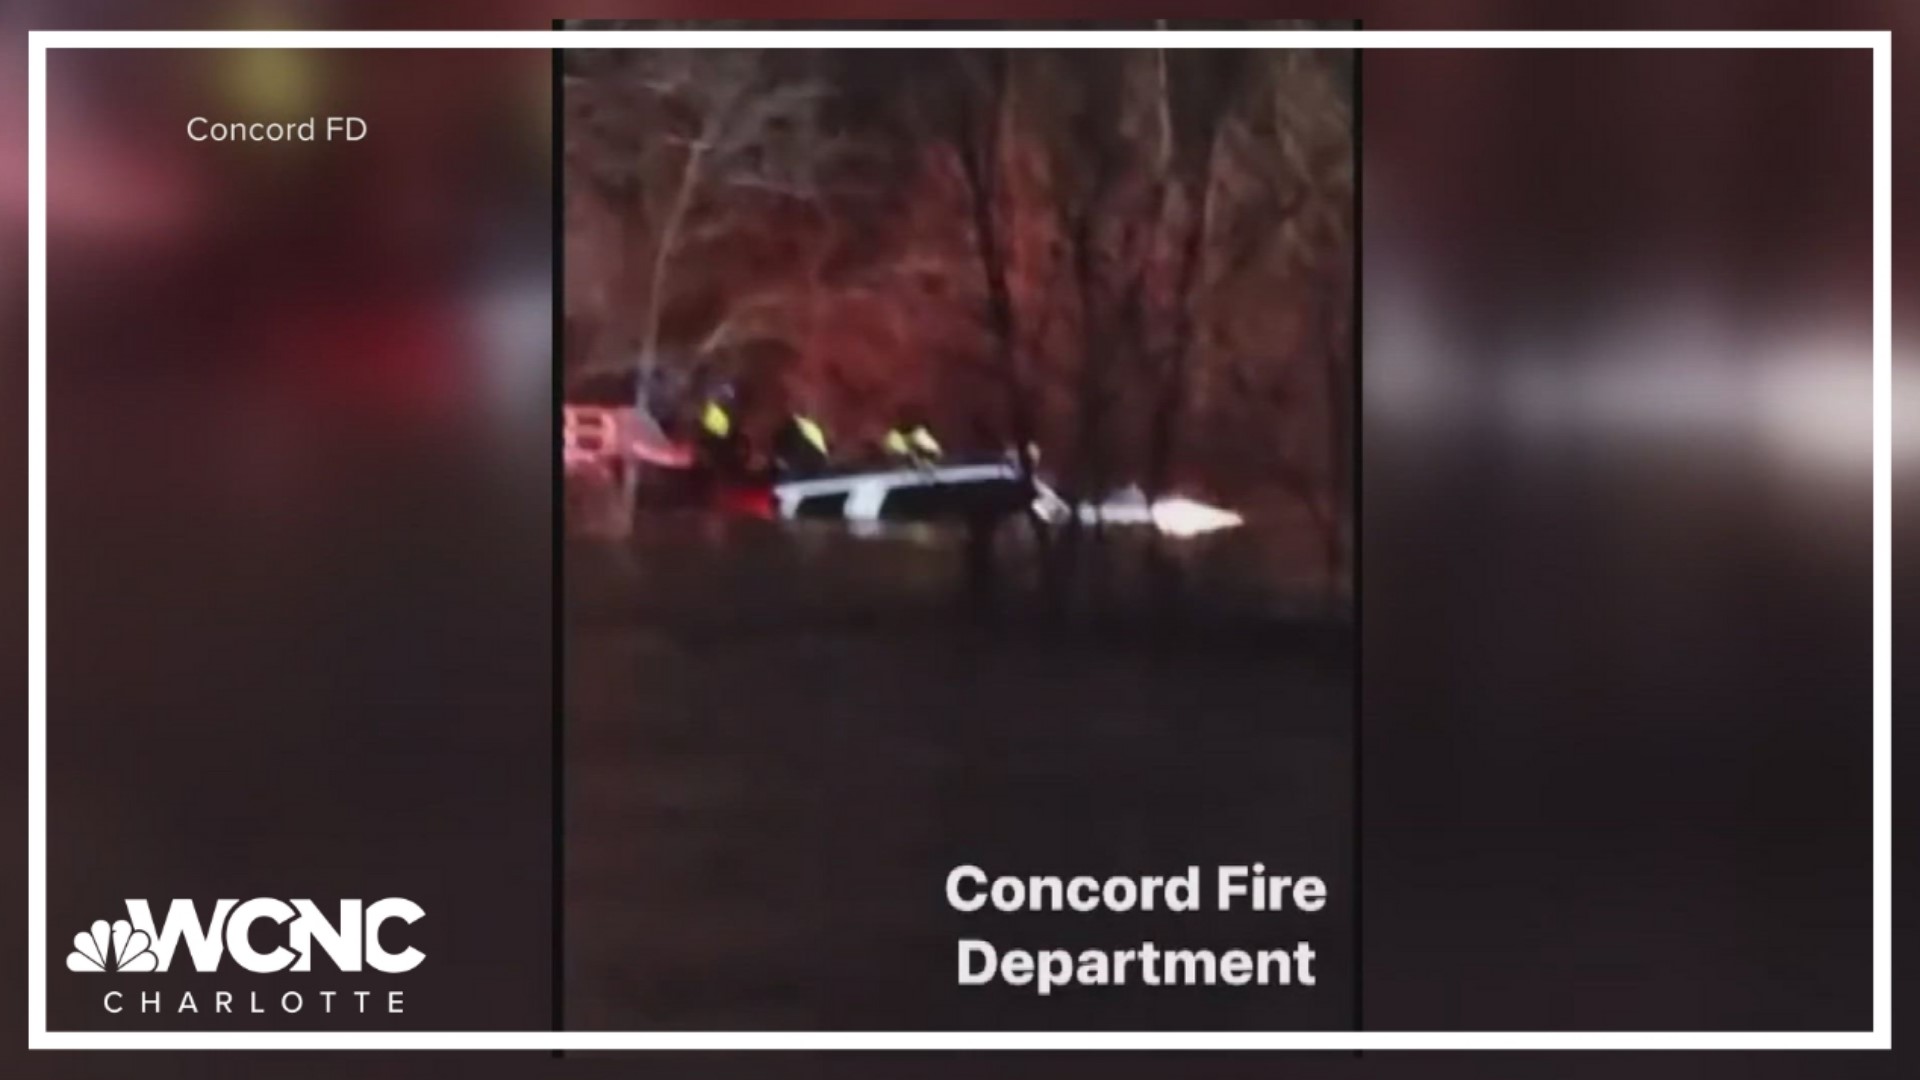 Concord Fire Department assisted Harrisburg Fire in the rescue.